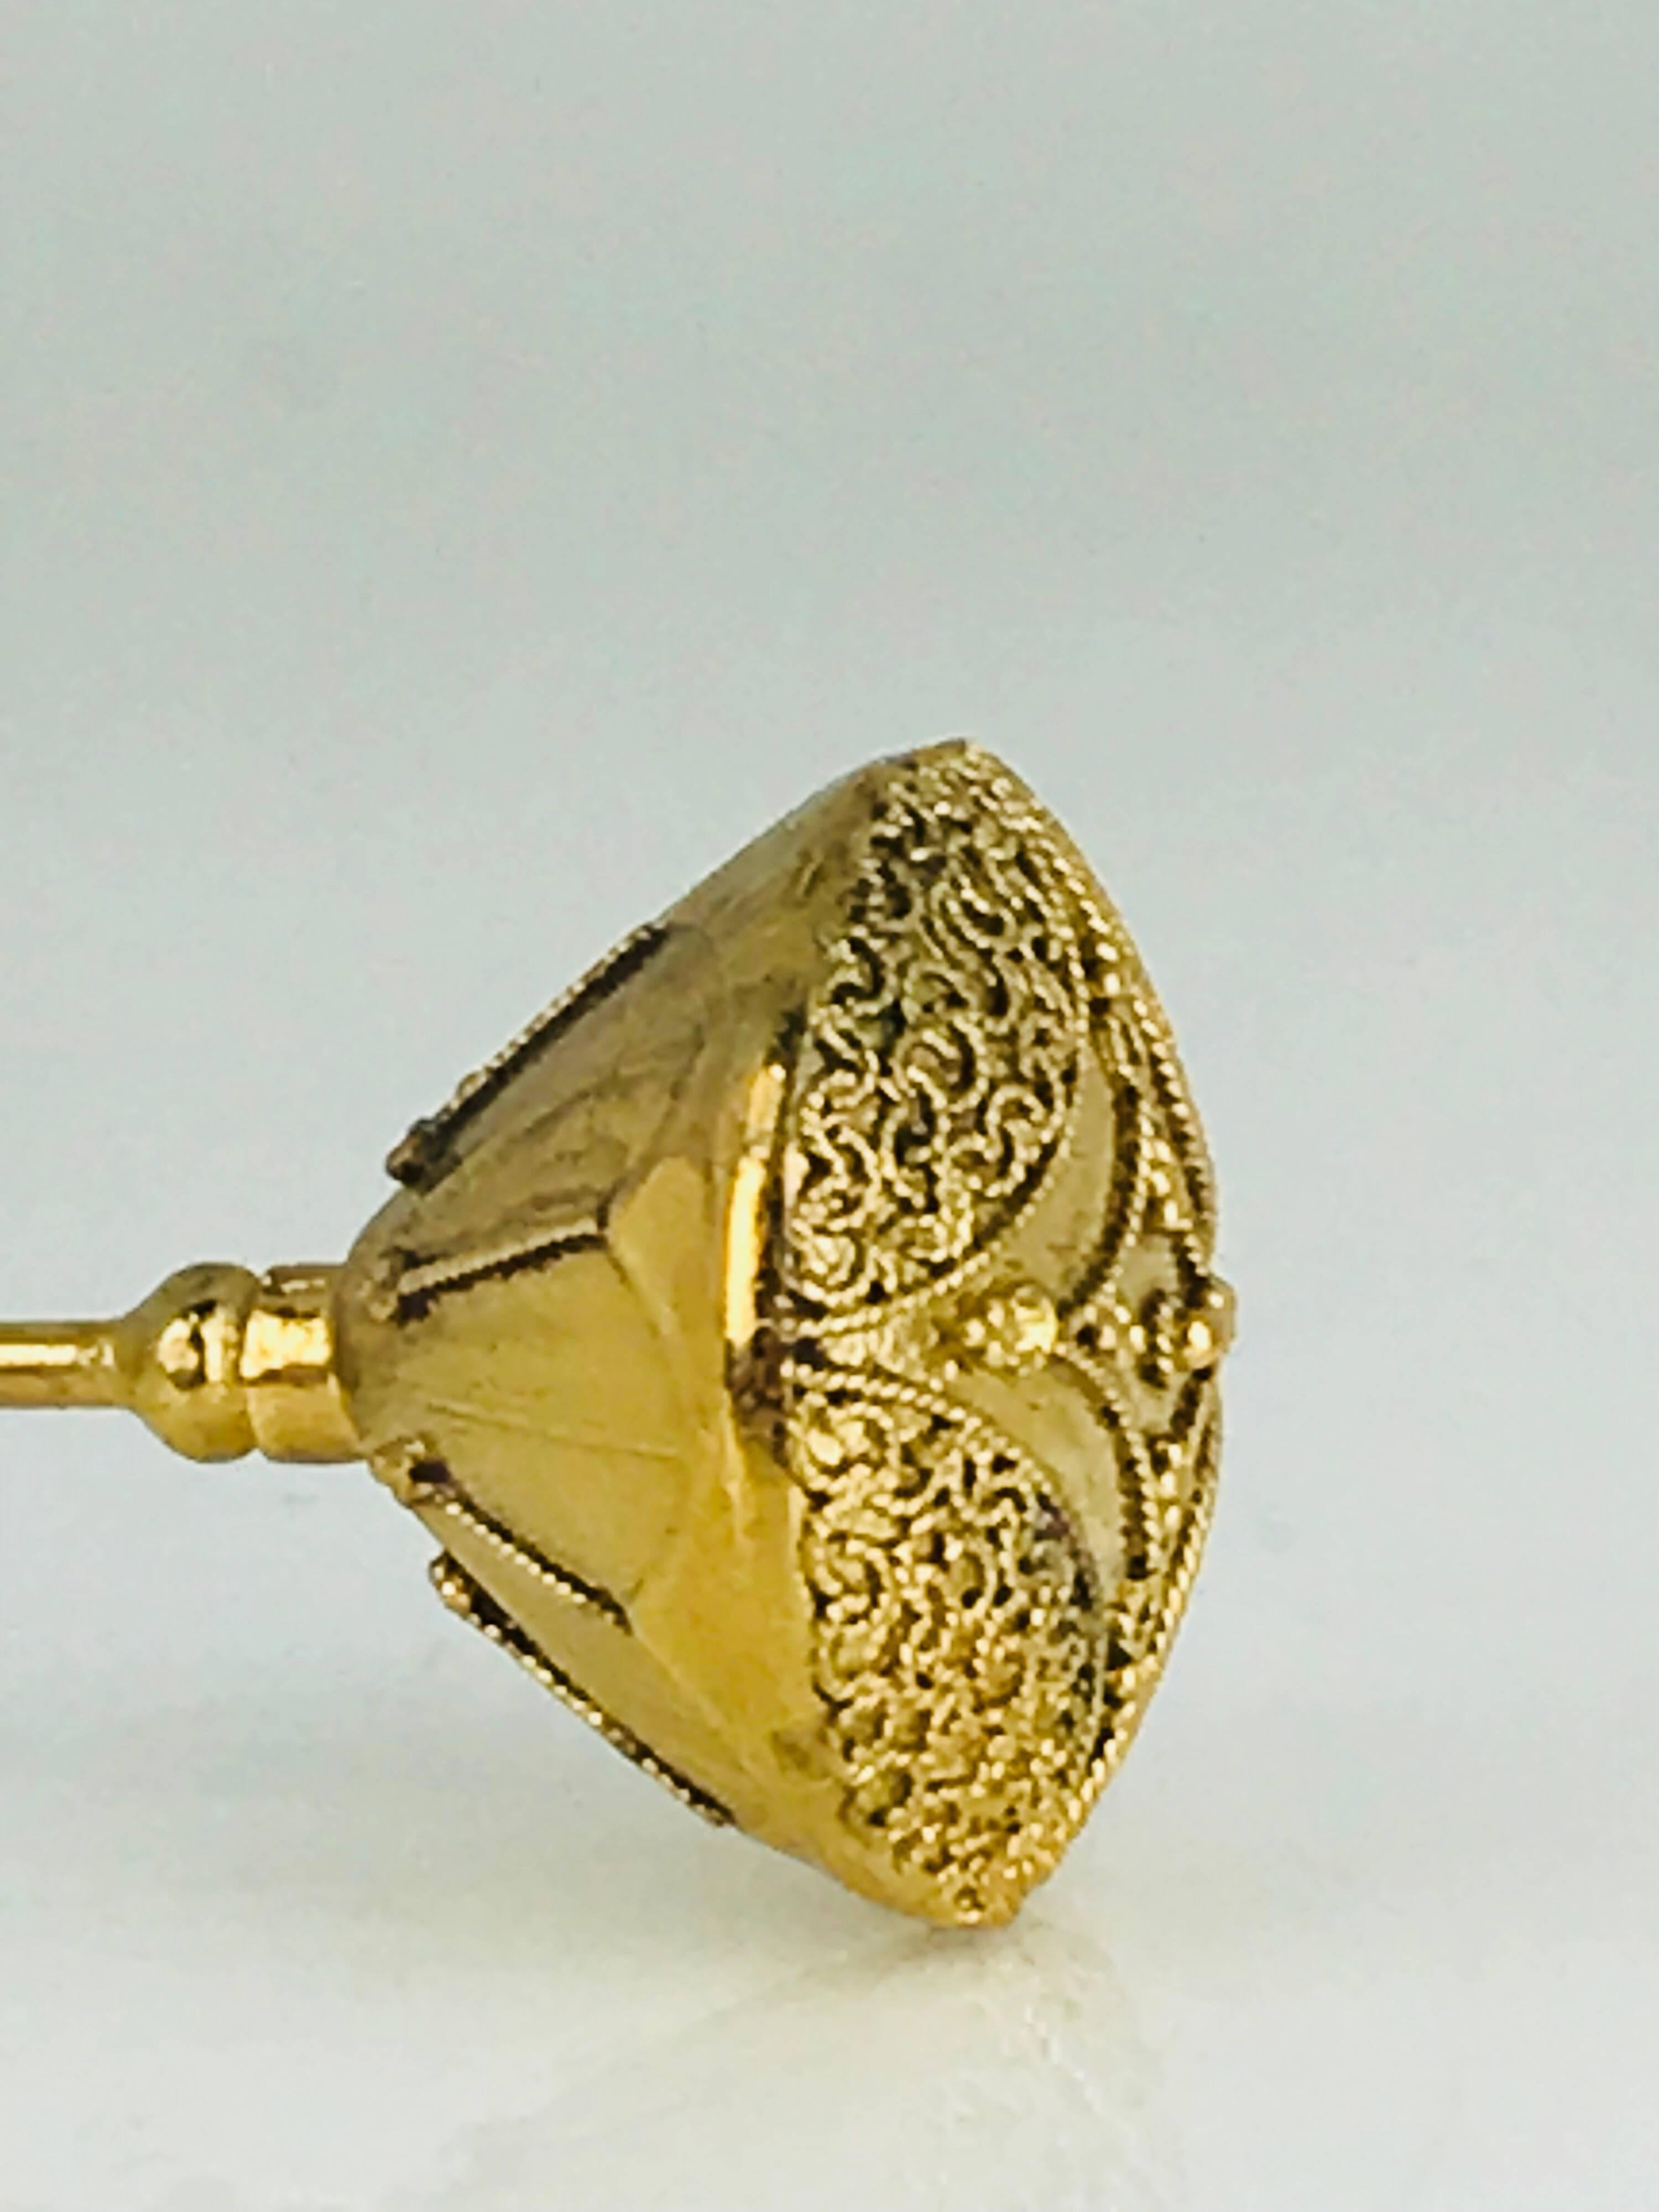 Vermeil, Victorian Scroll Encrusted Hat Pin
Circa 1840
Gilted, vermeil gold

.65 x .60 inches wide is the top width
6.5 inches in length

GIA Gemologist inspected & evaluated